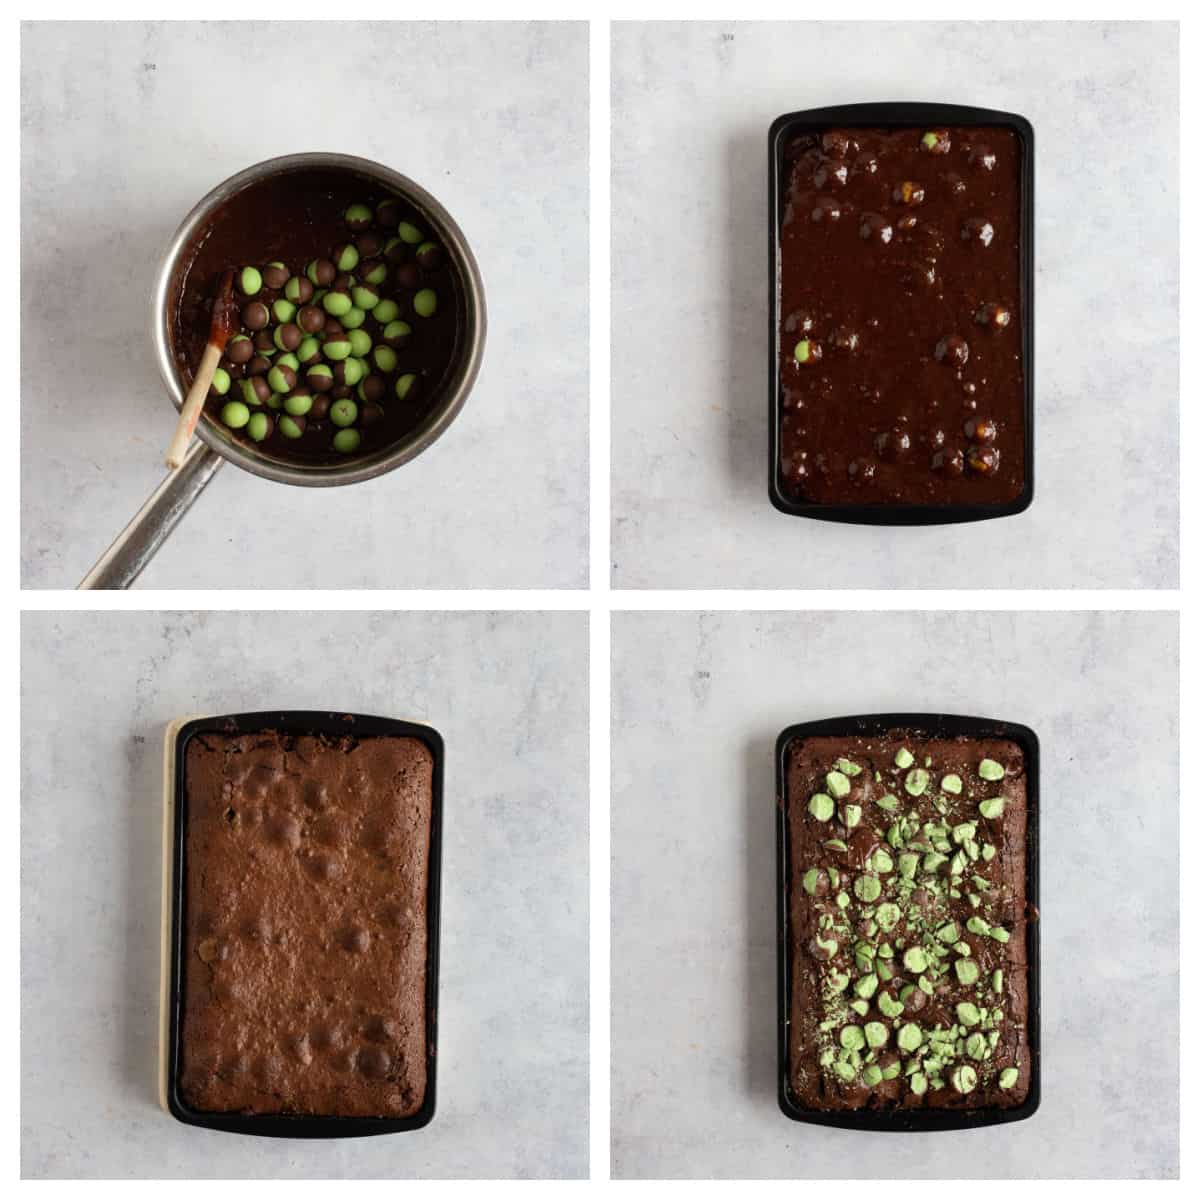 Baked mint aero brownies in a baking tin.